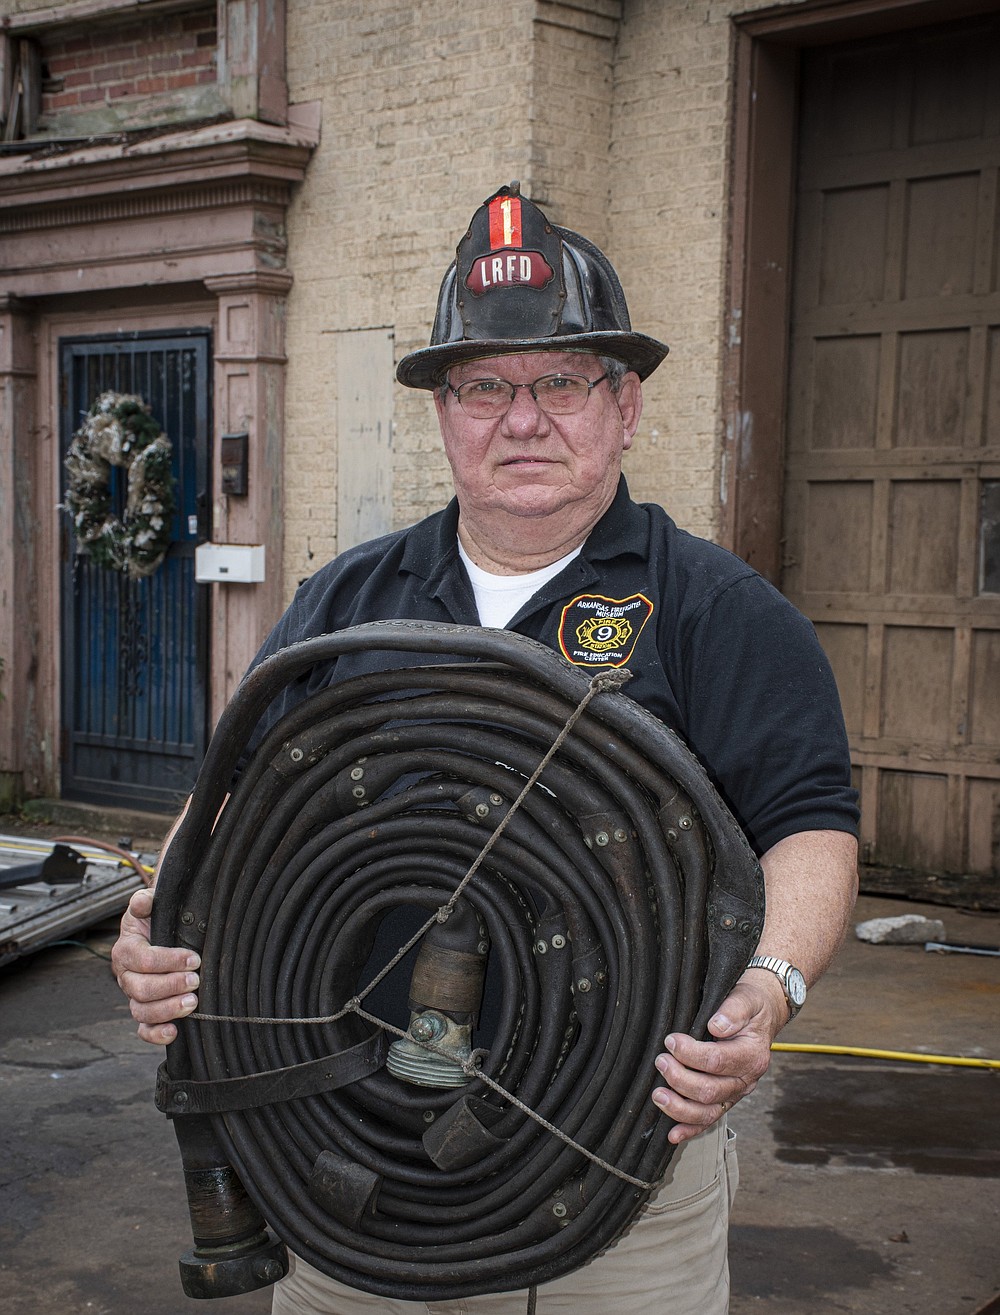 Wearing a historic leather helmet and holding an 1840-vintage leather fire hose, Bob Franklin stands outside the 1930 firehouse on East Sixth Street, where he hopes to create a the Arkansas Firefighter Museum and Fire Education Center.

(Arkansas Democrat-Gazette/Cary Jenkins)